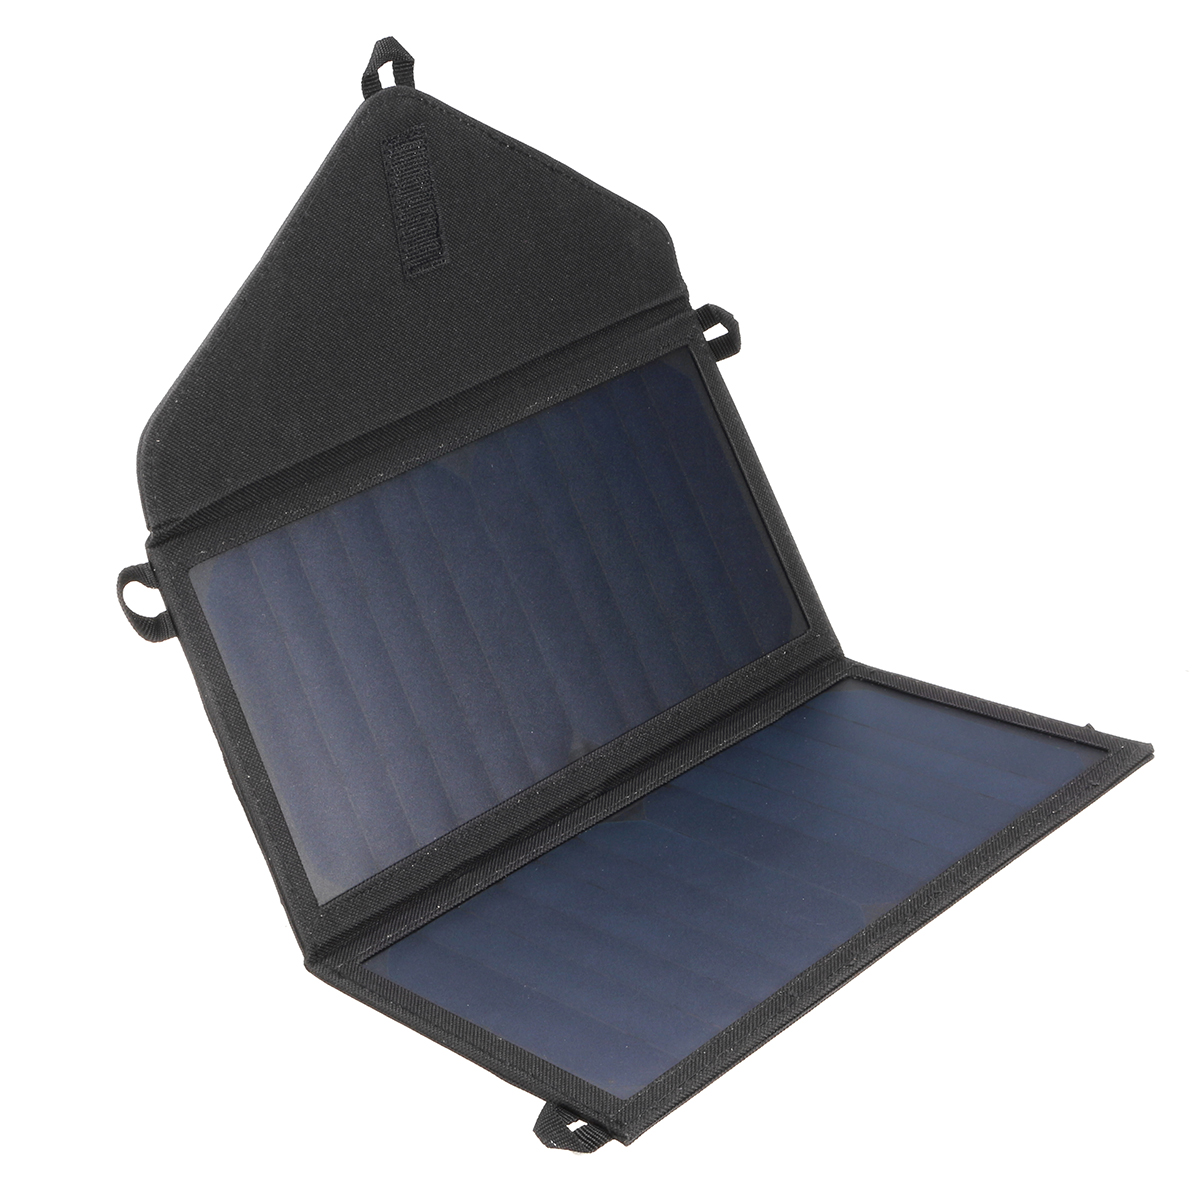 20W-Foldable-Solar-Panel-Portable-5V-2A-USB-Battery-Charger-Power-Bank-Fpr-Camping-Hiking-Traveling-1476063-8